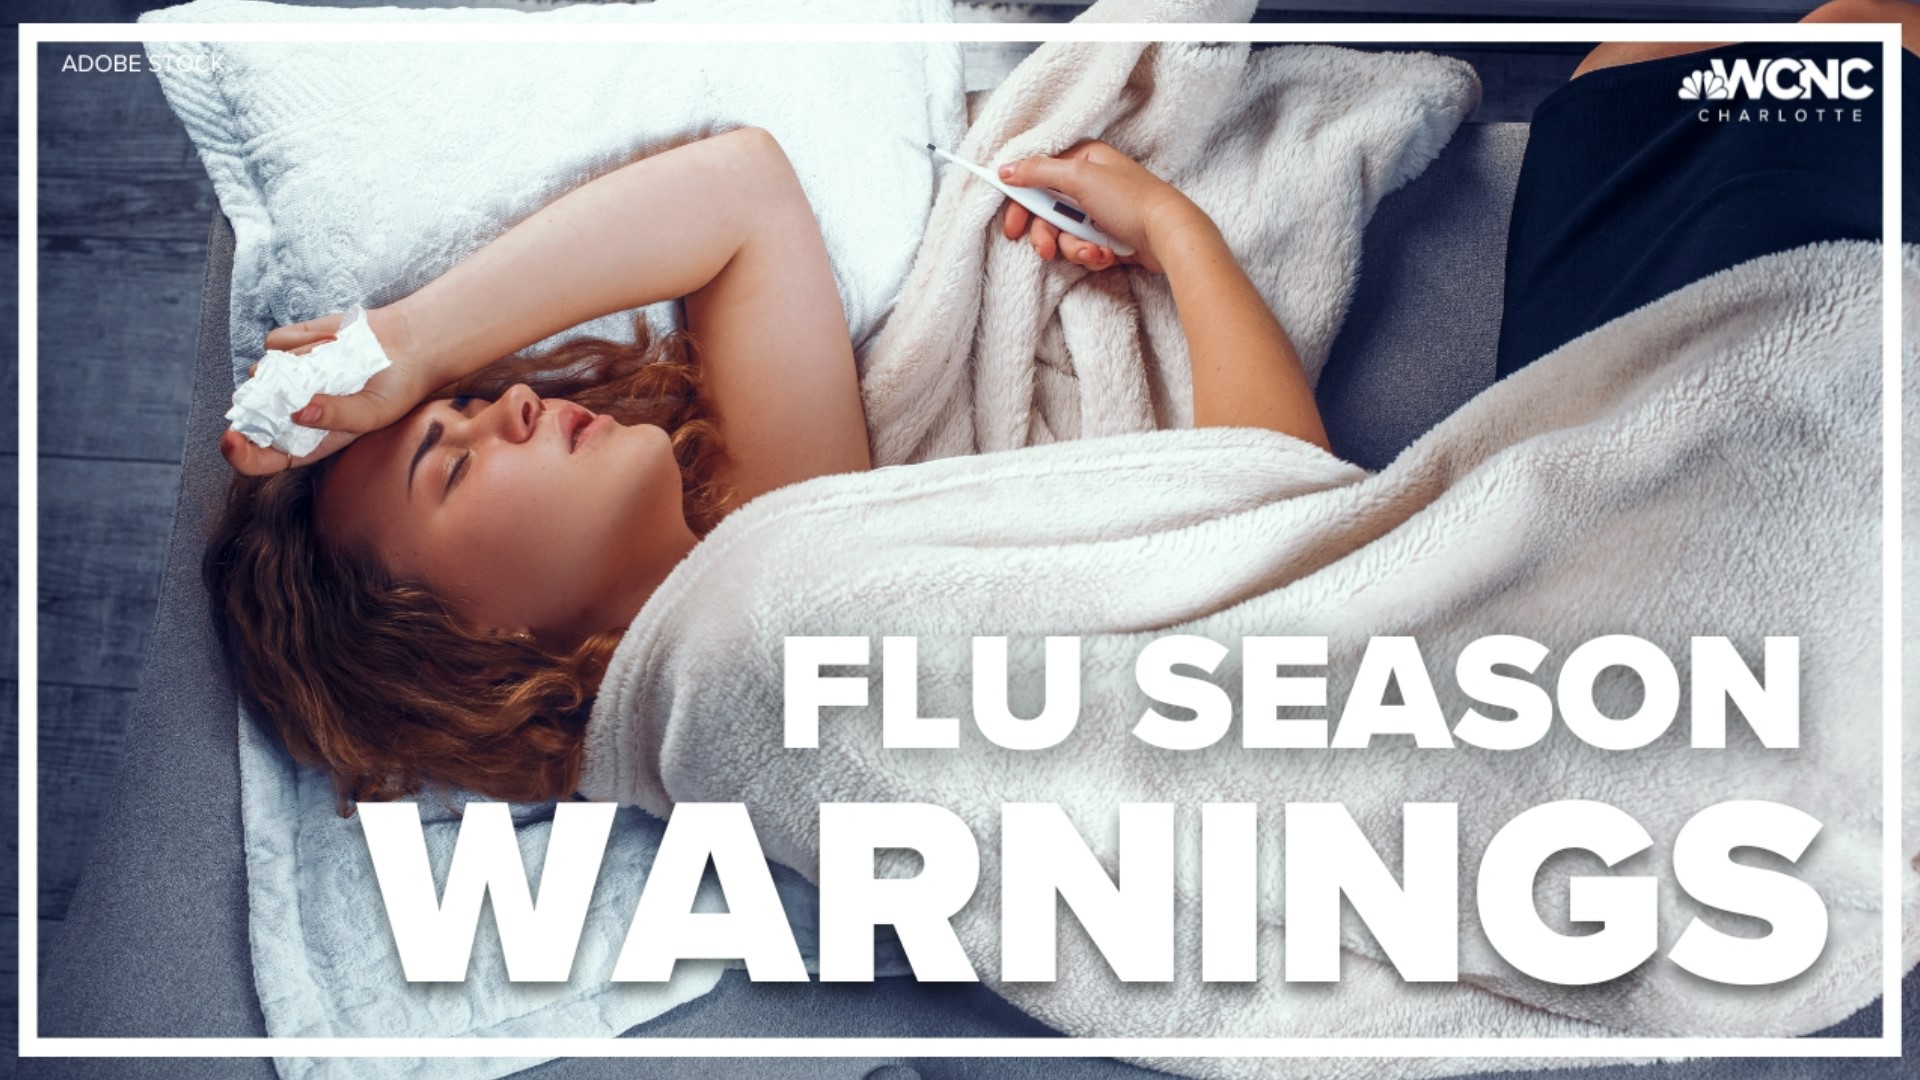 Doctors say it's important to get your flu shot now so you're protected when the virus is at its peak this winter.